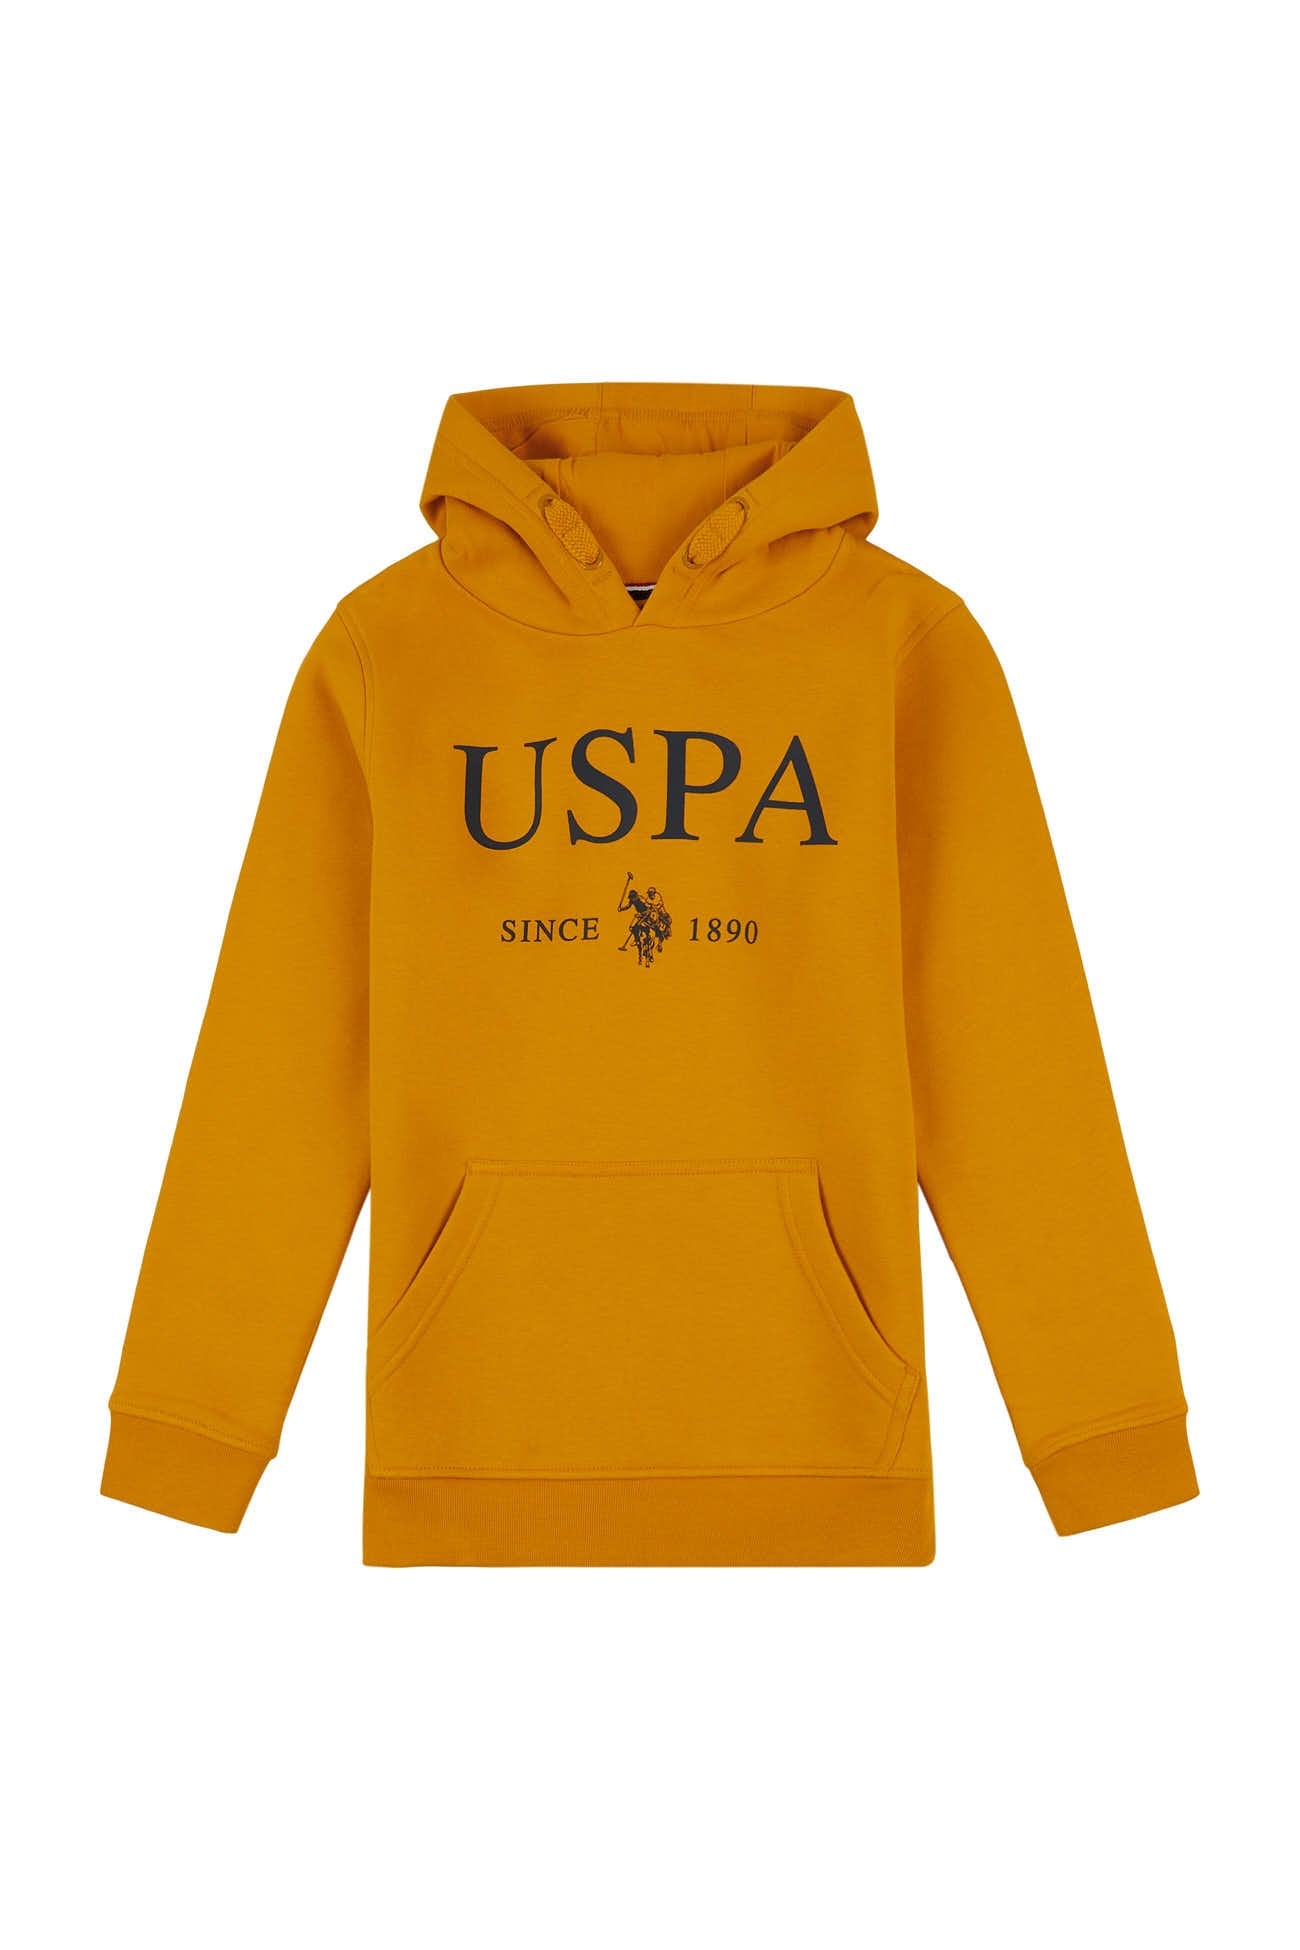 U.S. Polo Assn. Boys Since 1890 Hoodie in Golden Yellow